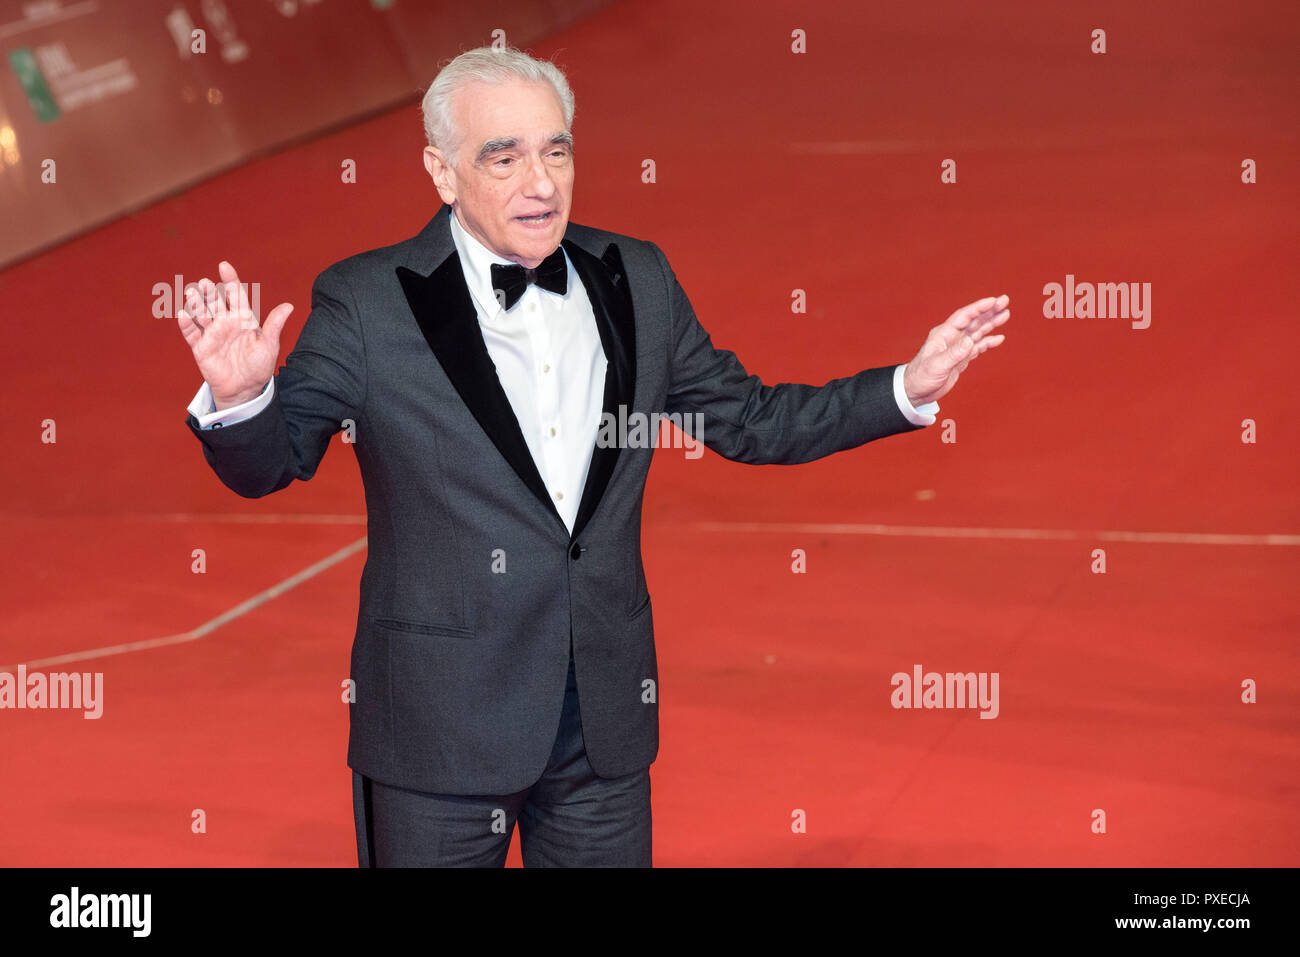 Rome, Italy. 22nd October, 2018. Rome, Italy. 22nd Oct, 2018. Martin Scorsese attending the red carpet during the 13th Rome Film Fest Credit: Silvia Gerbino/Alamy Live News Credit: Silvia Gerbino/Alamy Live News Stock Photo